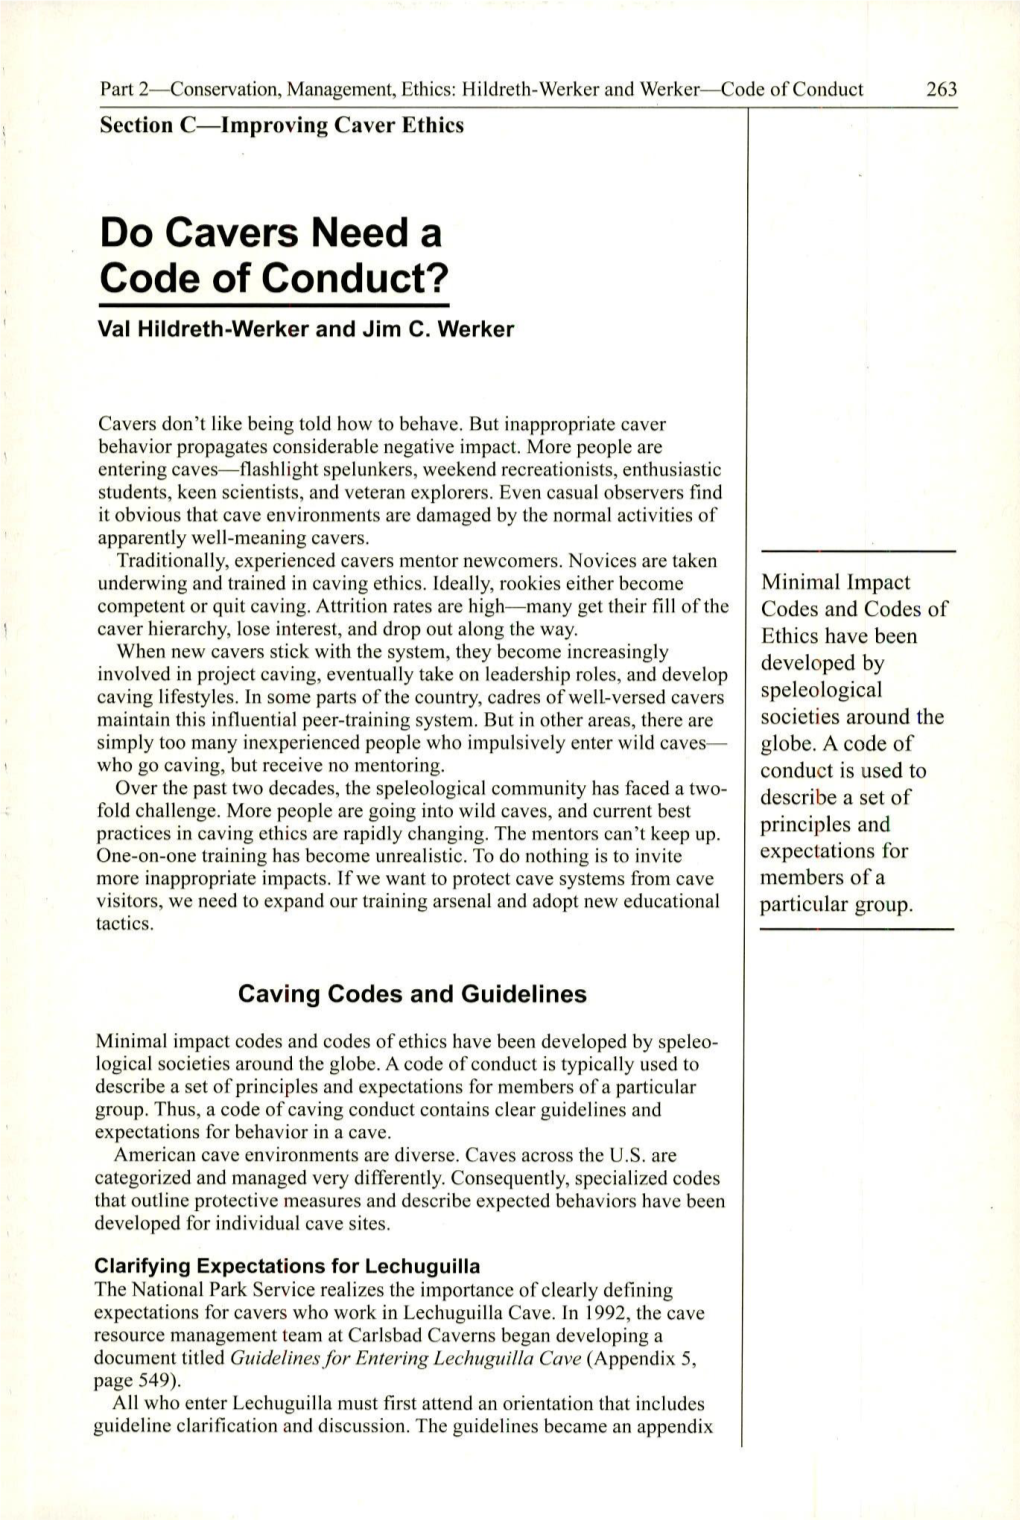 Do Cavers Need a Code of Conduct? Val Hildreth-Werker and Jim C